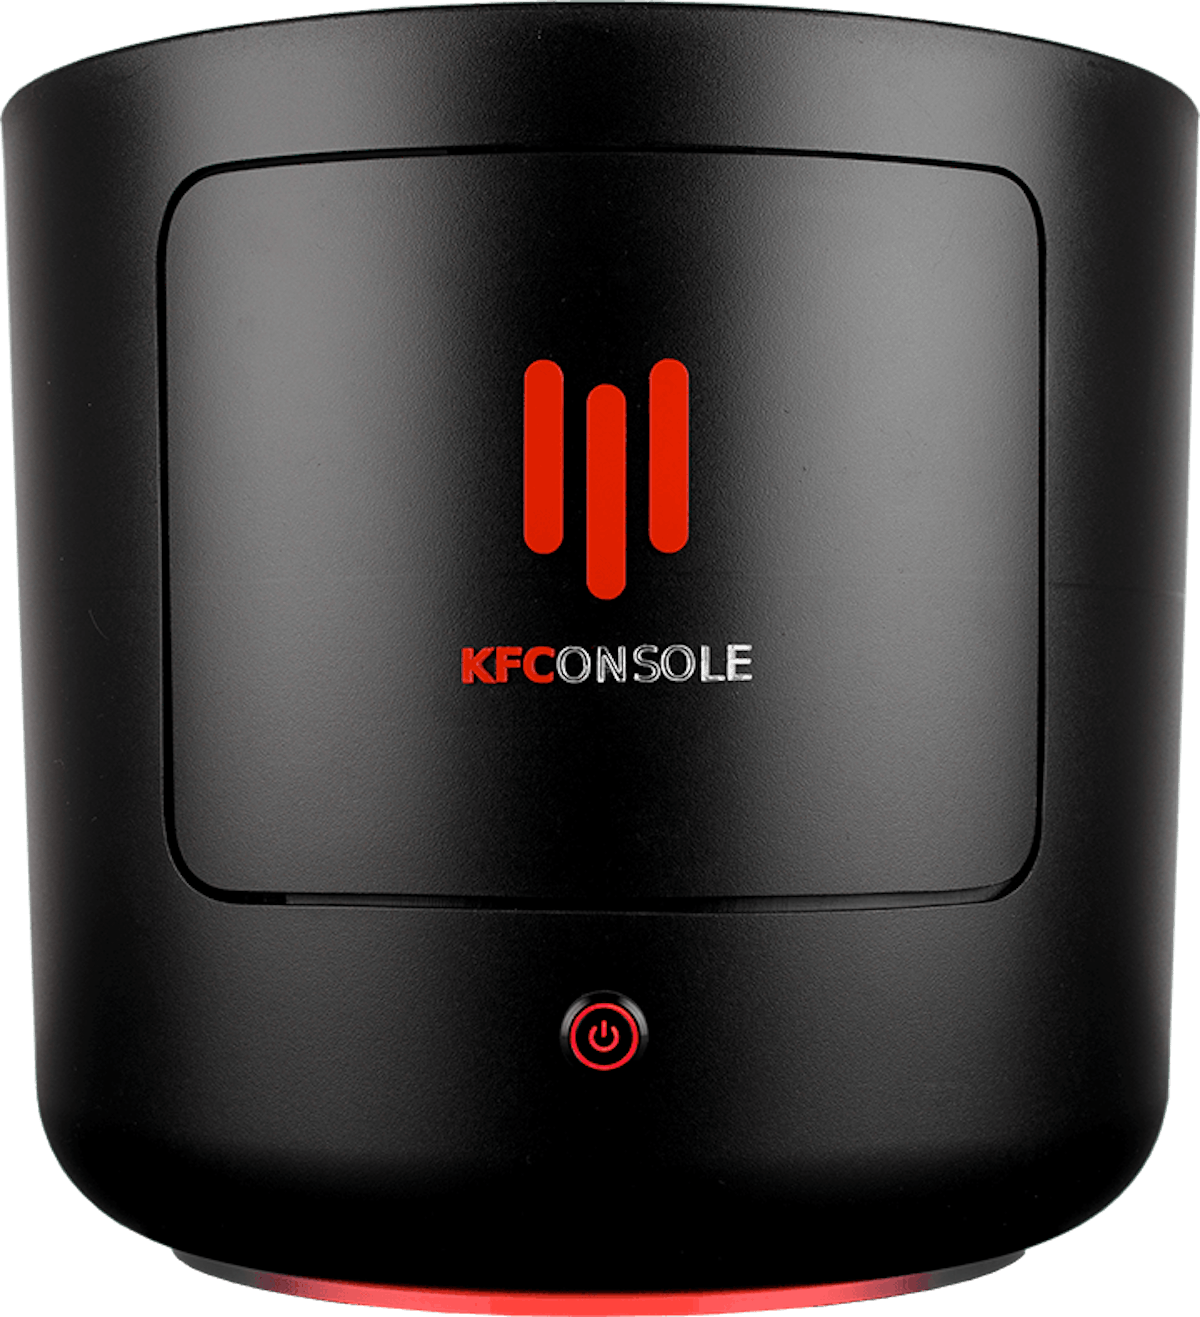 featured image - KFC Partners with Cooler Master to Launch Gaming Console with Chicken Warmer